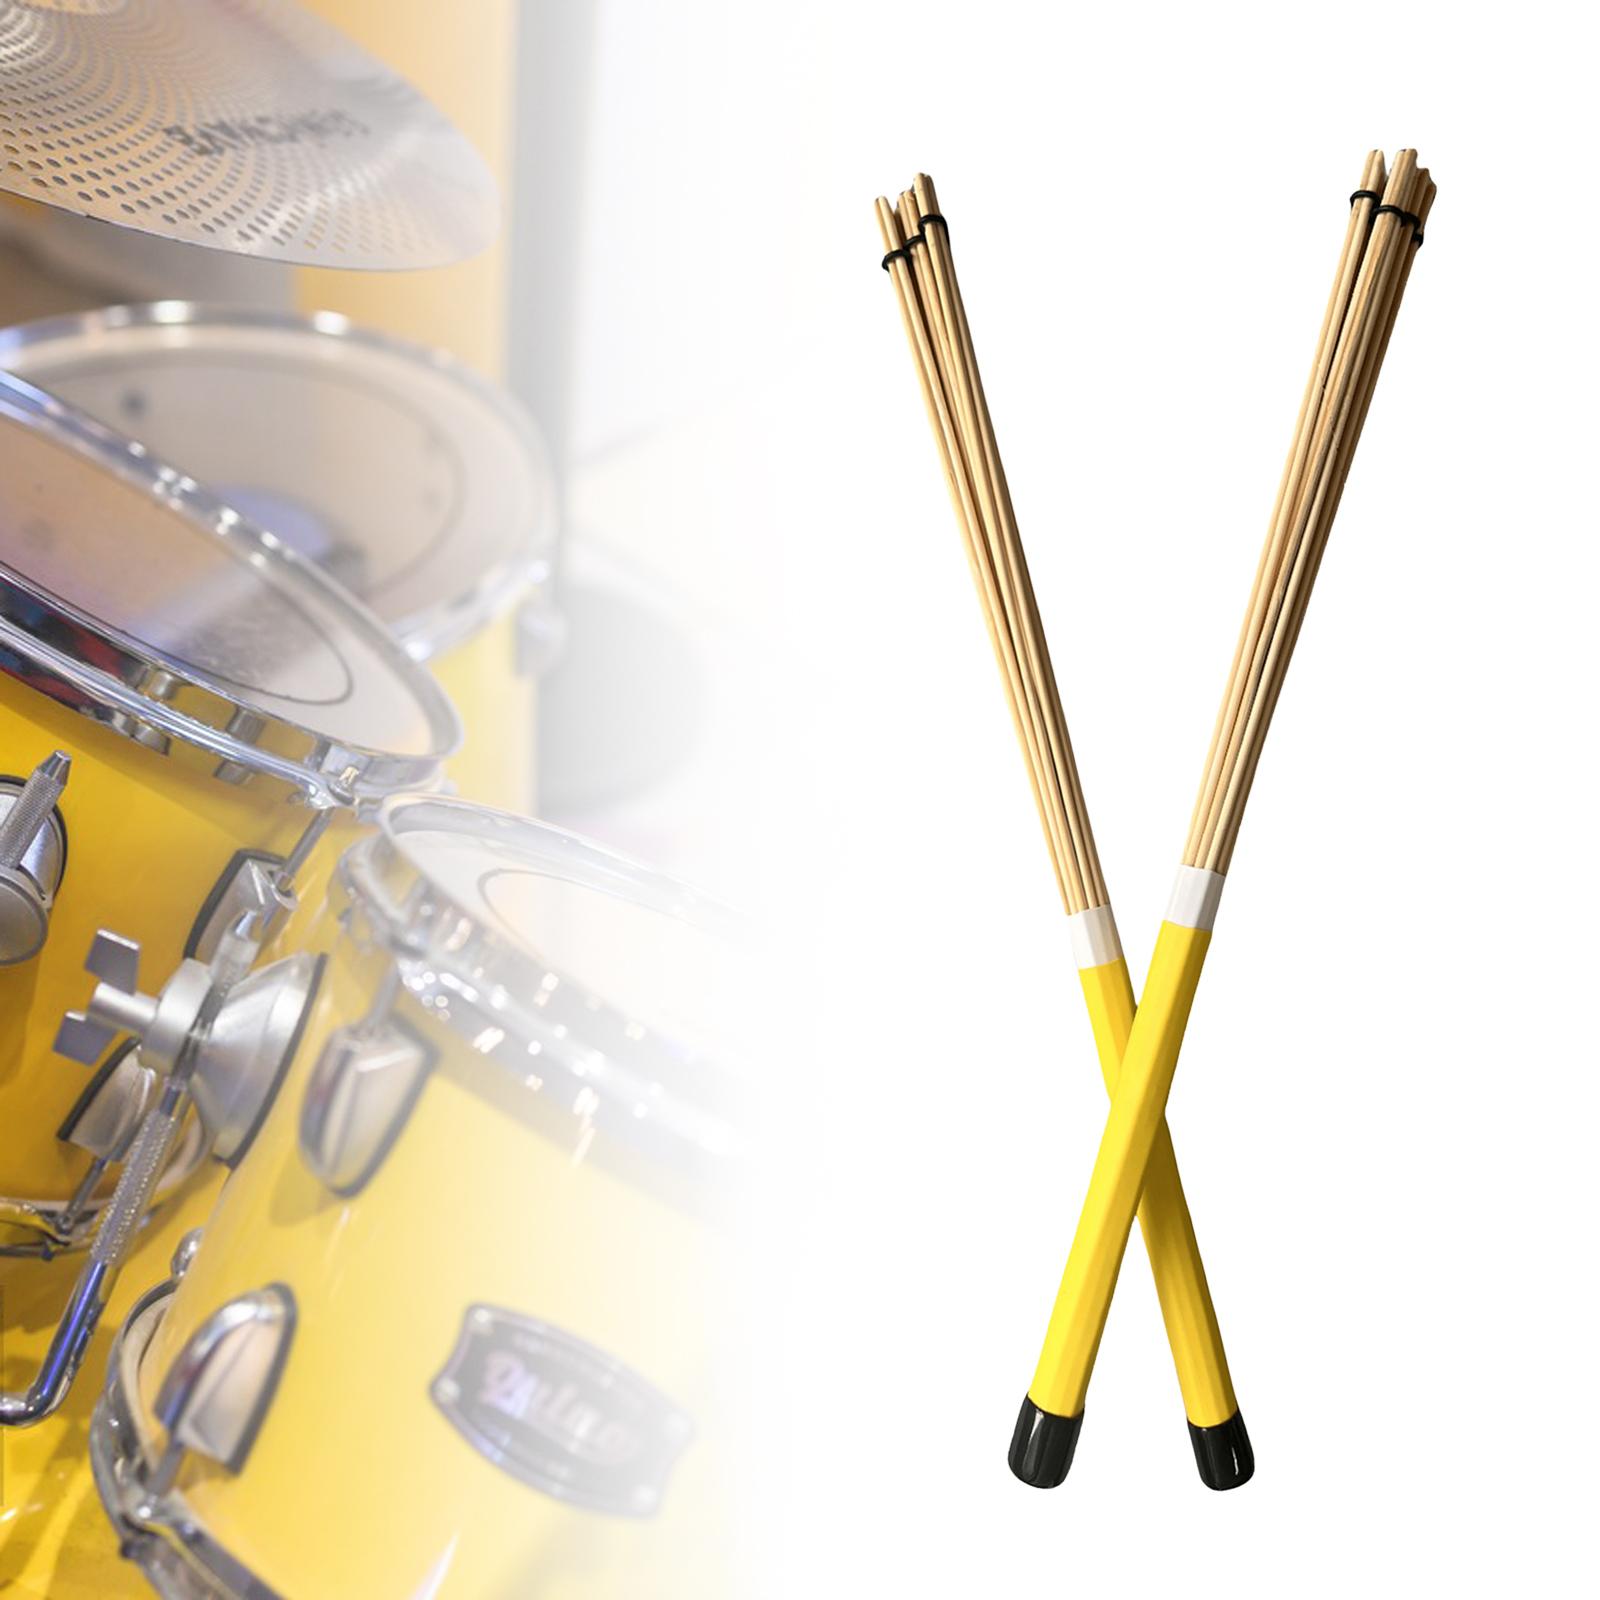 2 Pieces Bamboo Drum Stick Rods Brushes for Acoustic Performance Small Venue Yellow